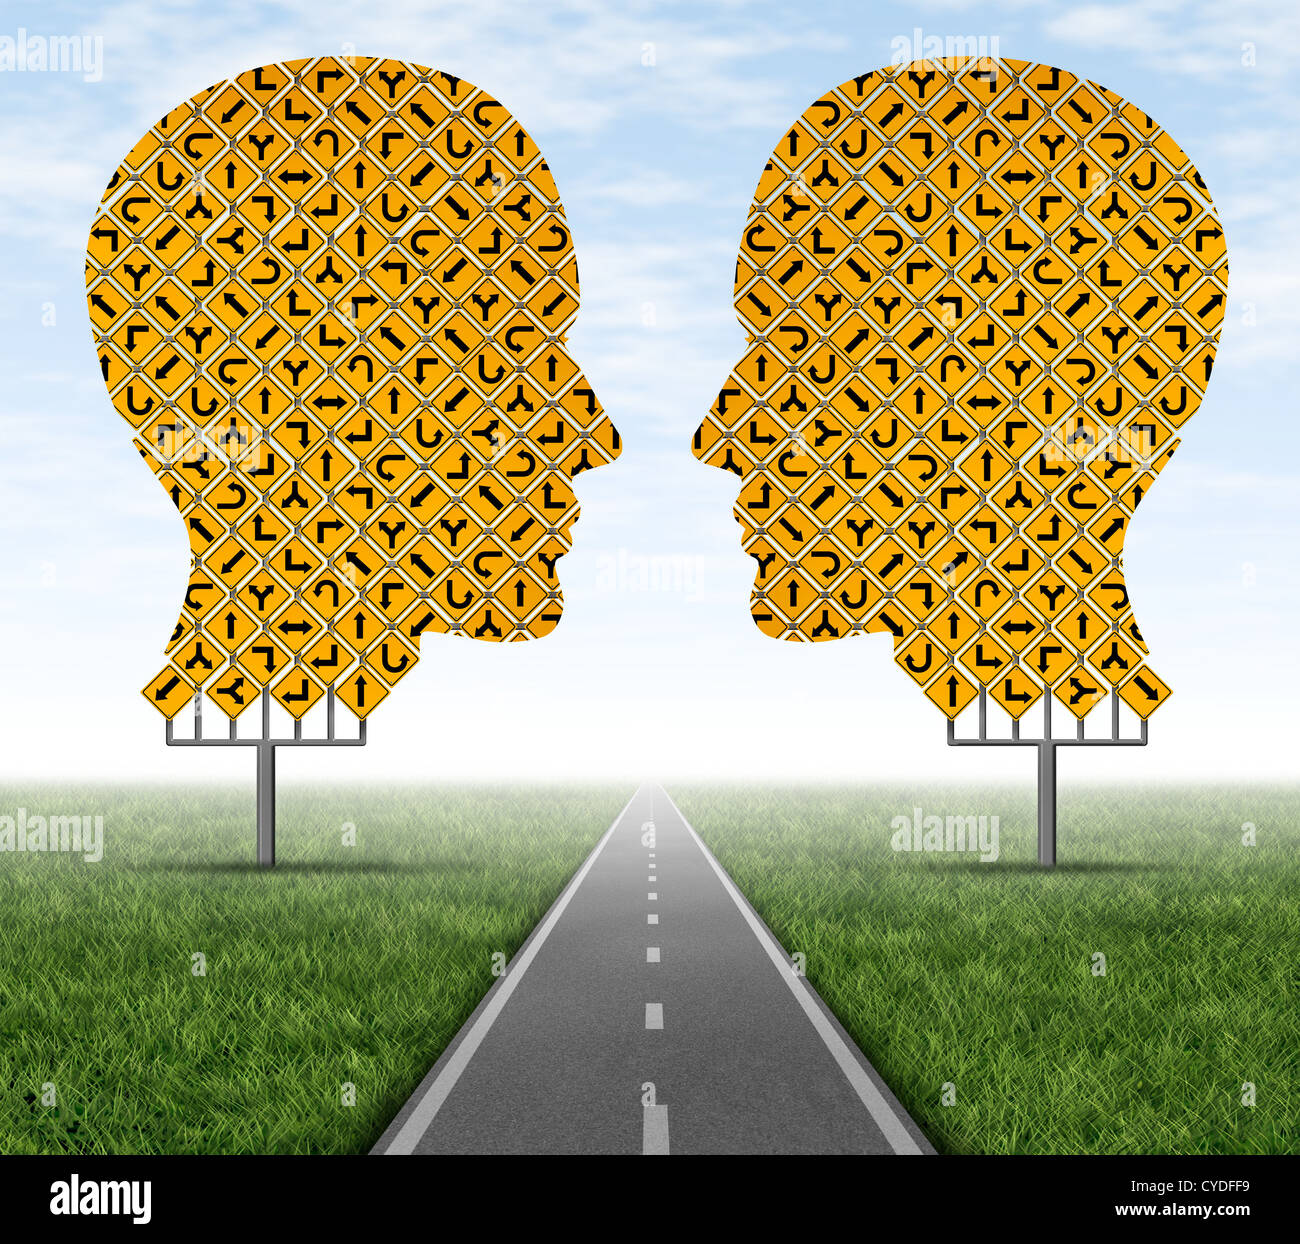 Collaborating together allowing to focus on a clear path by working as a team to achieve a common goal as shown by giant group of street signs in the shape of a human head with a consensus highway in three dimensions. Stock Photo